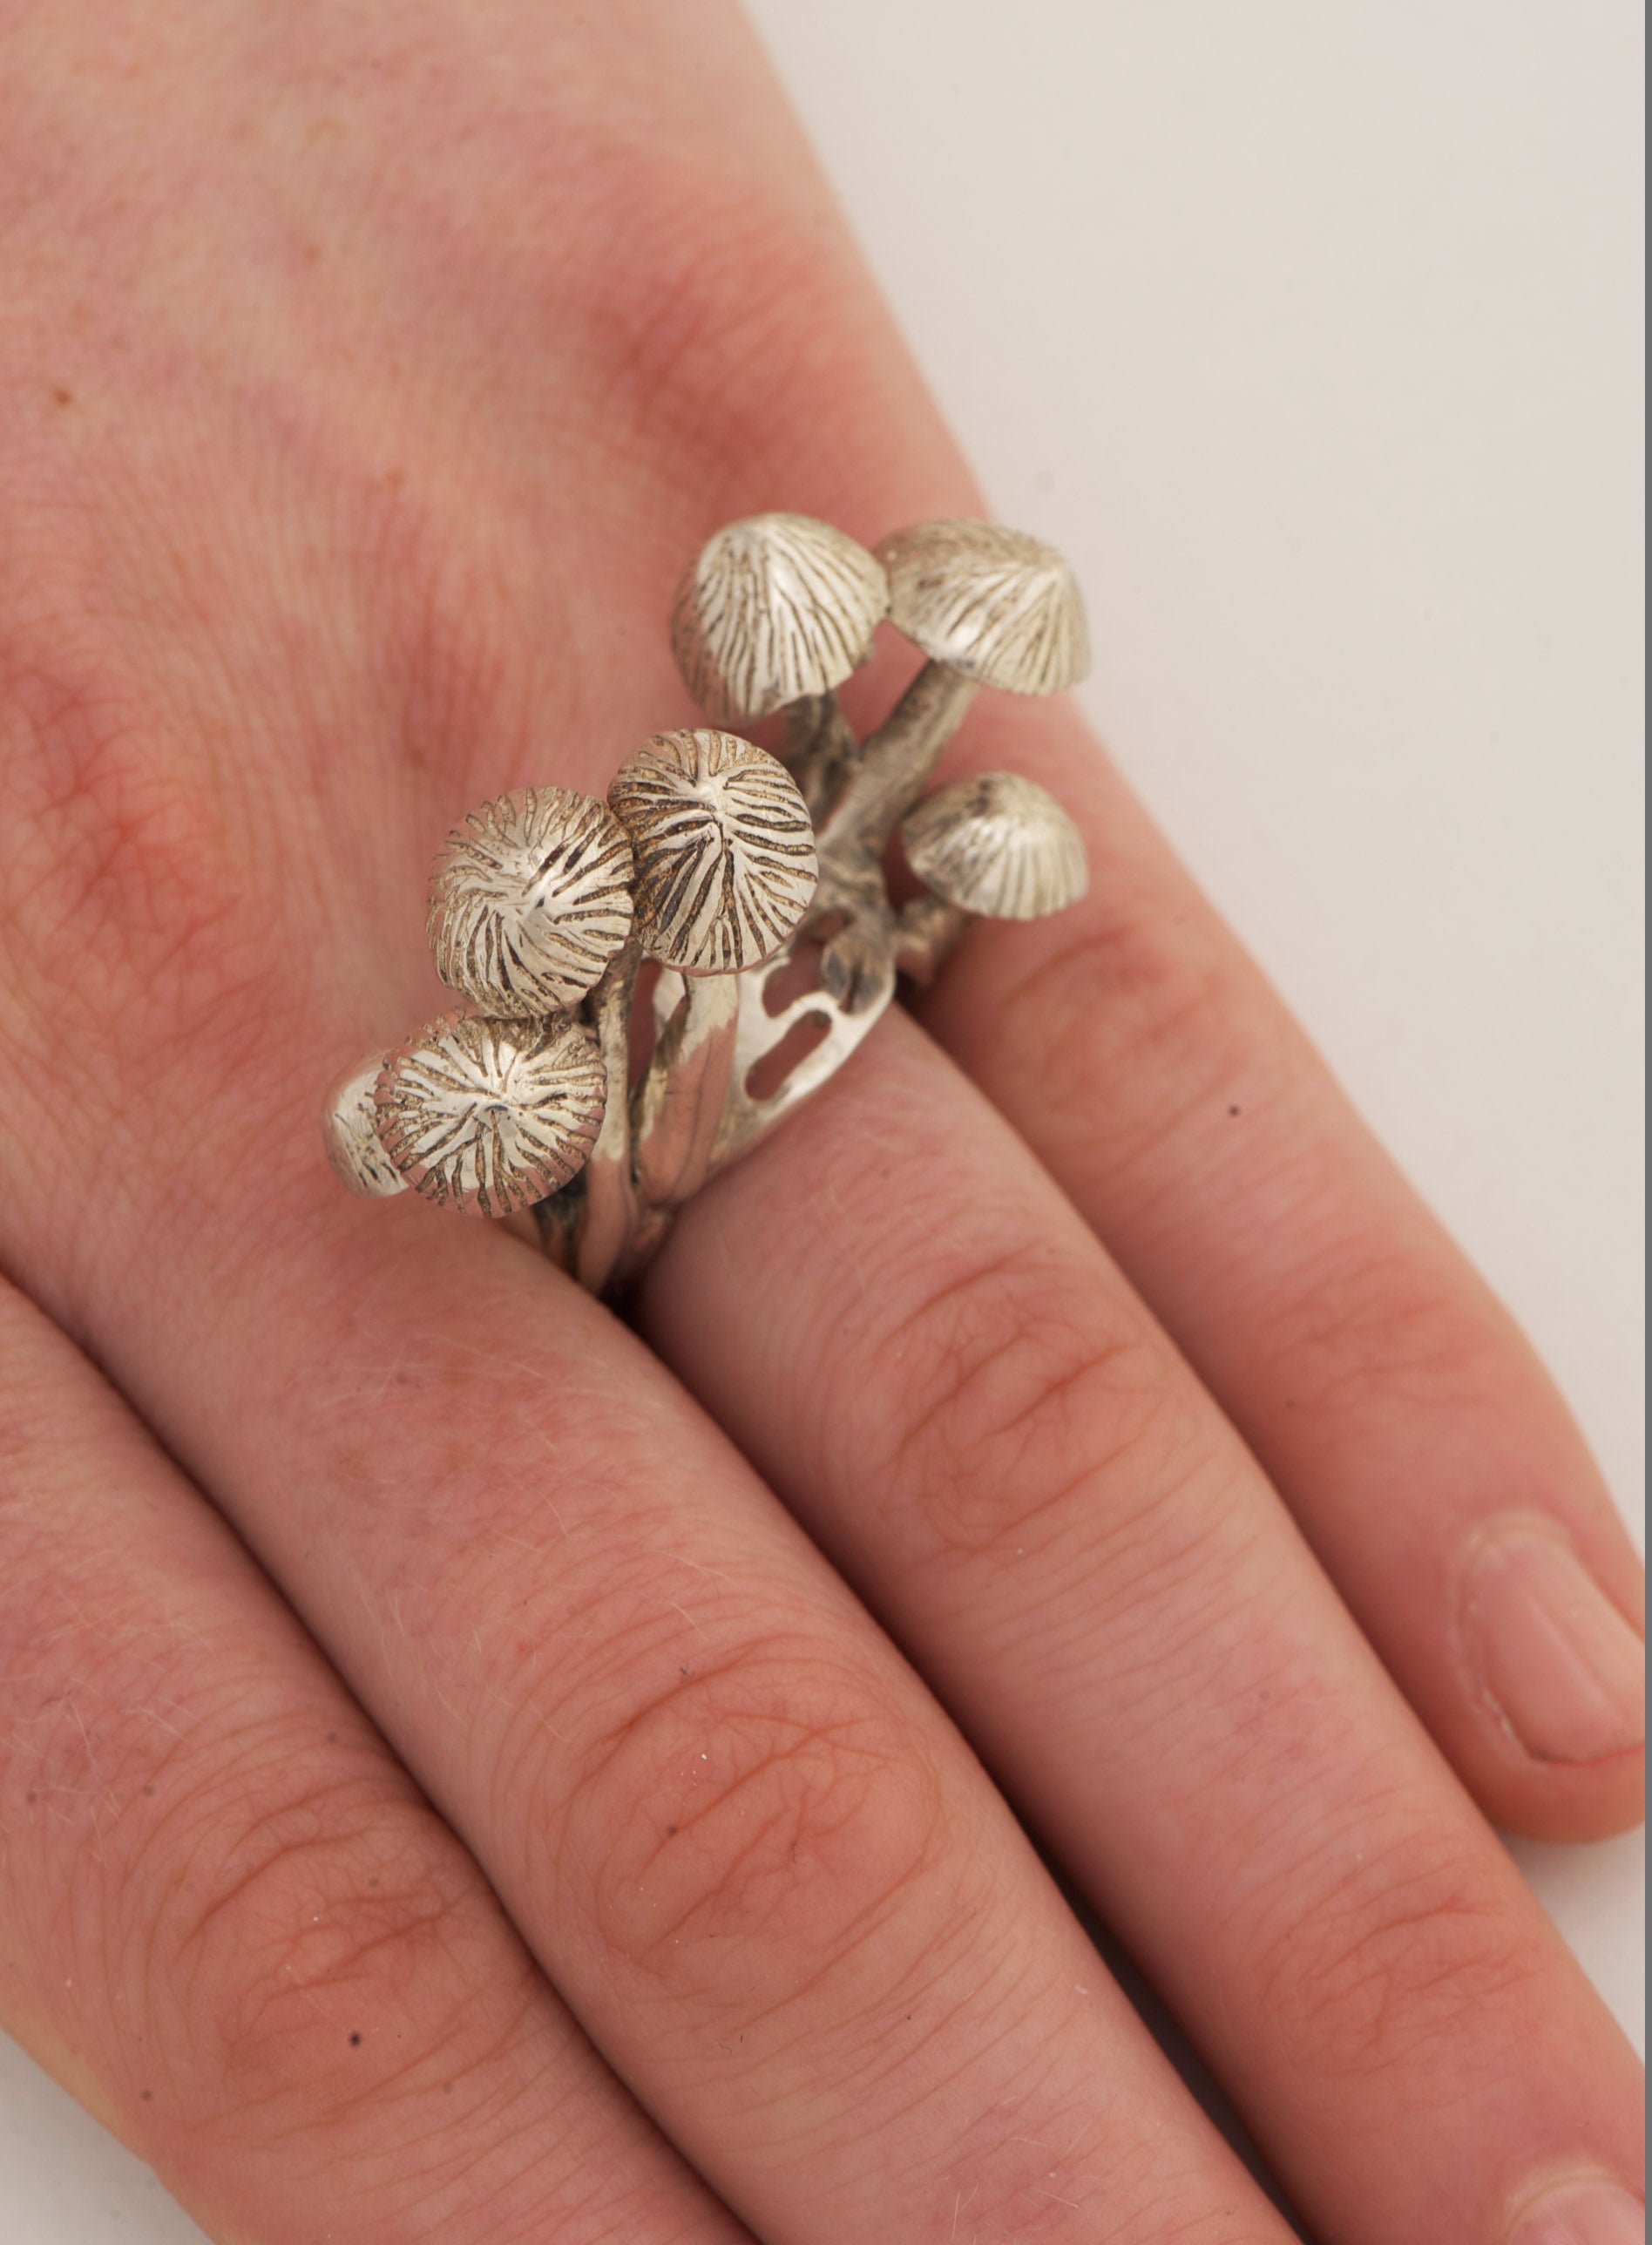 One of a kind, sculpture, art jewelry, silver coin cap mushroom ring by Peggy Skemp, fungi, fungus, mushroom ring